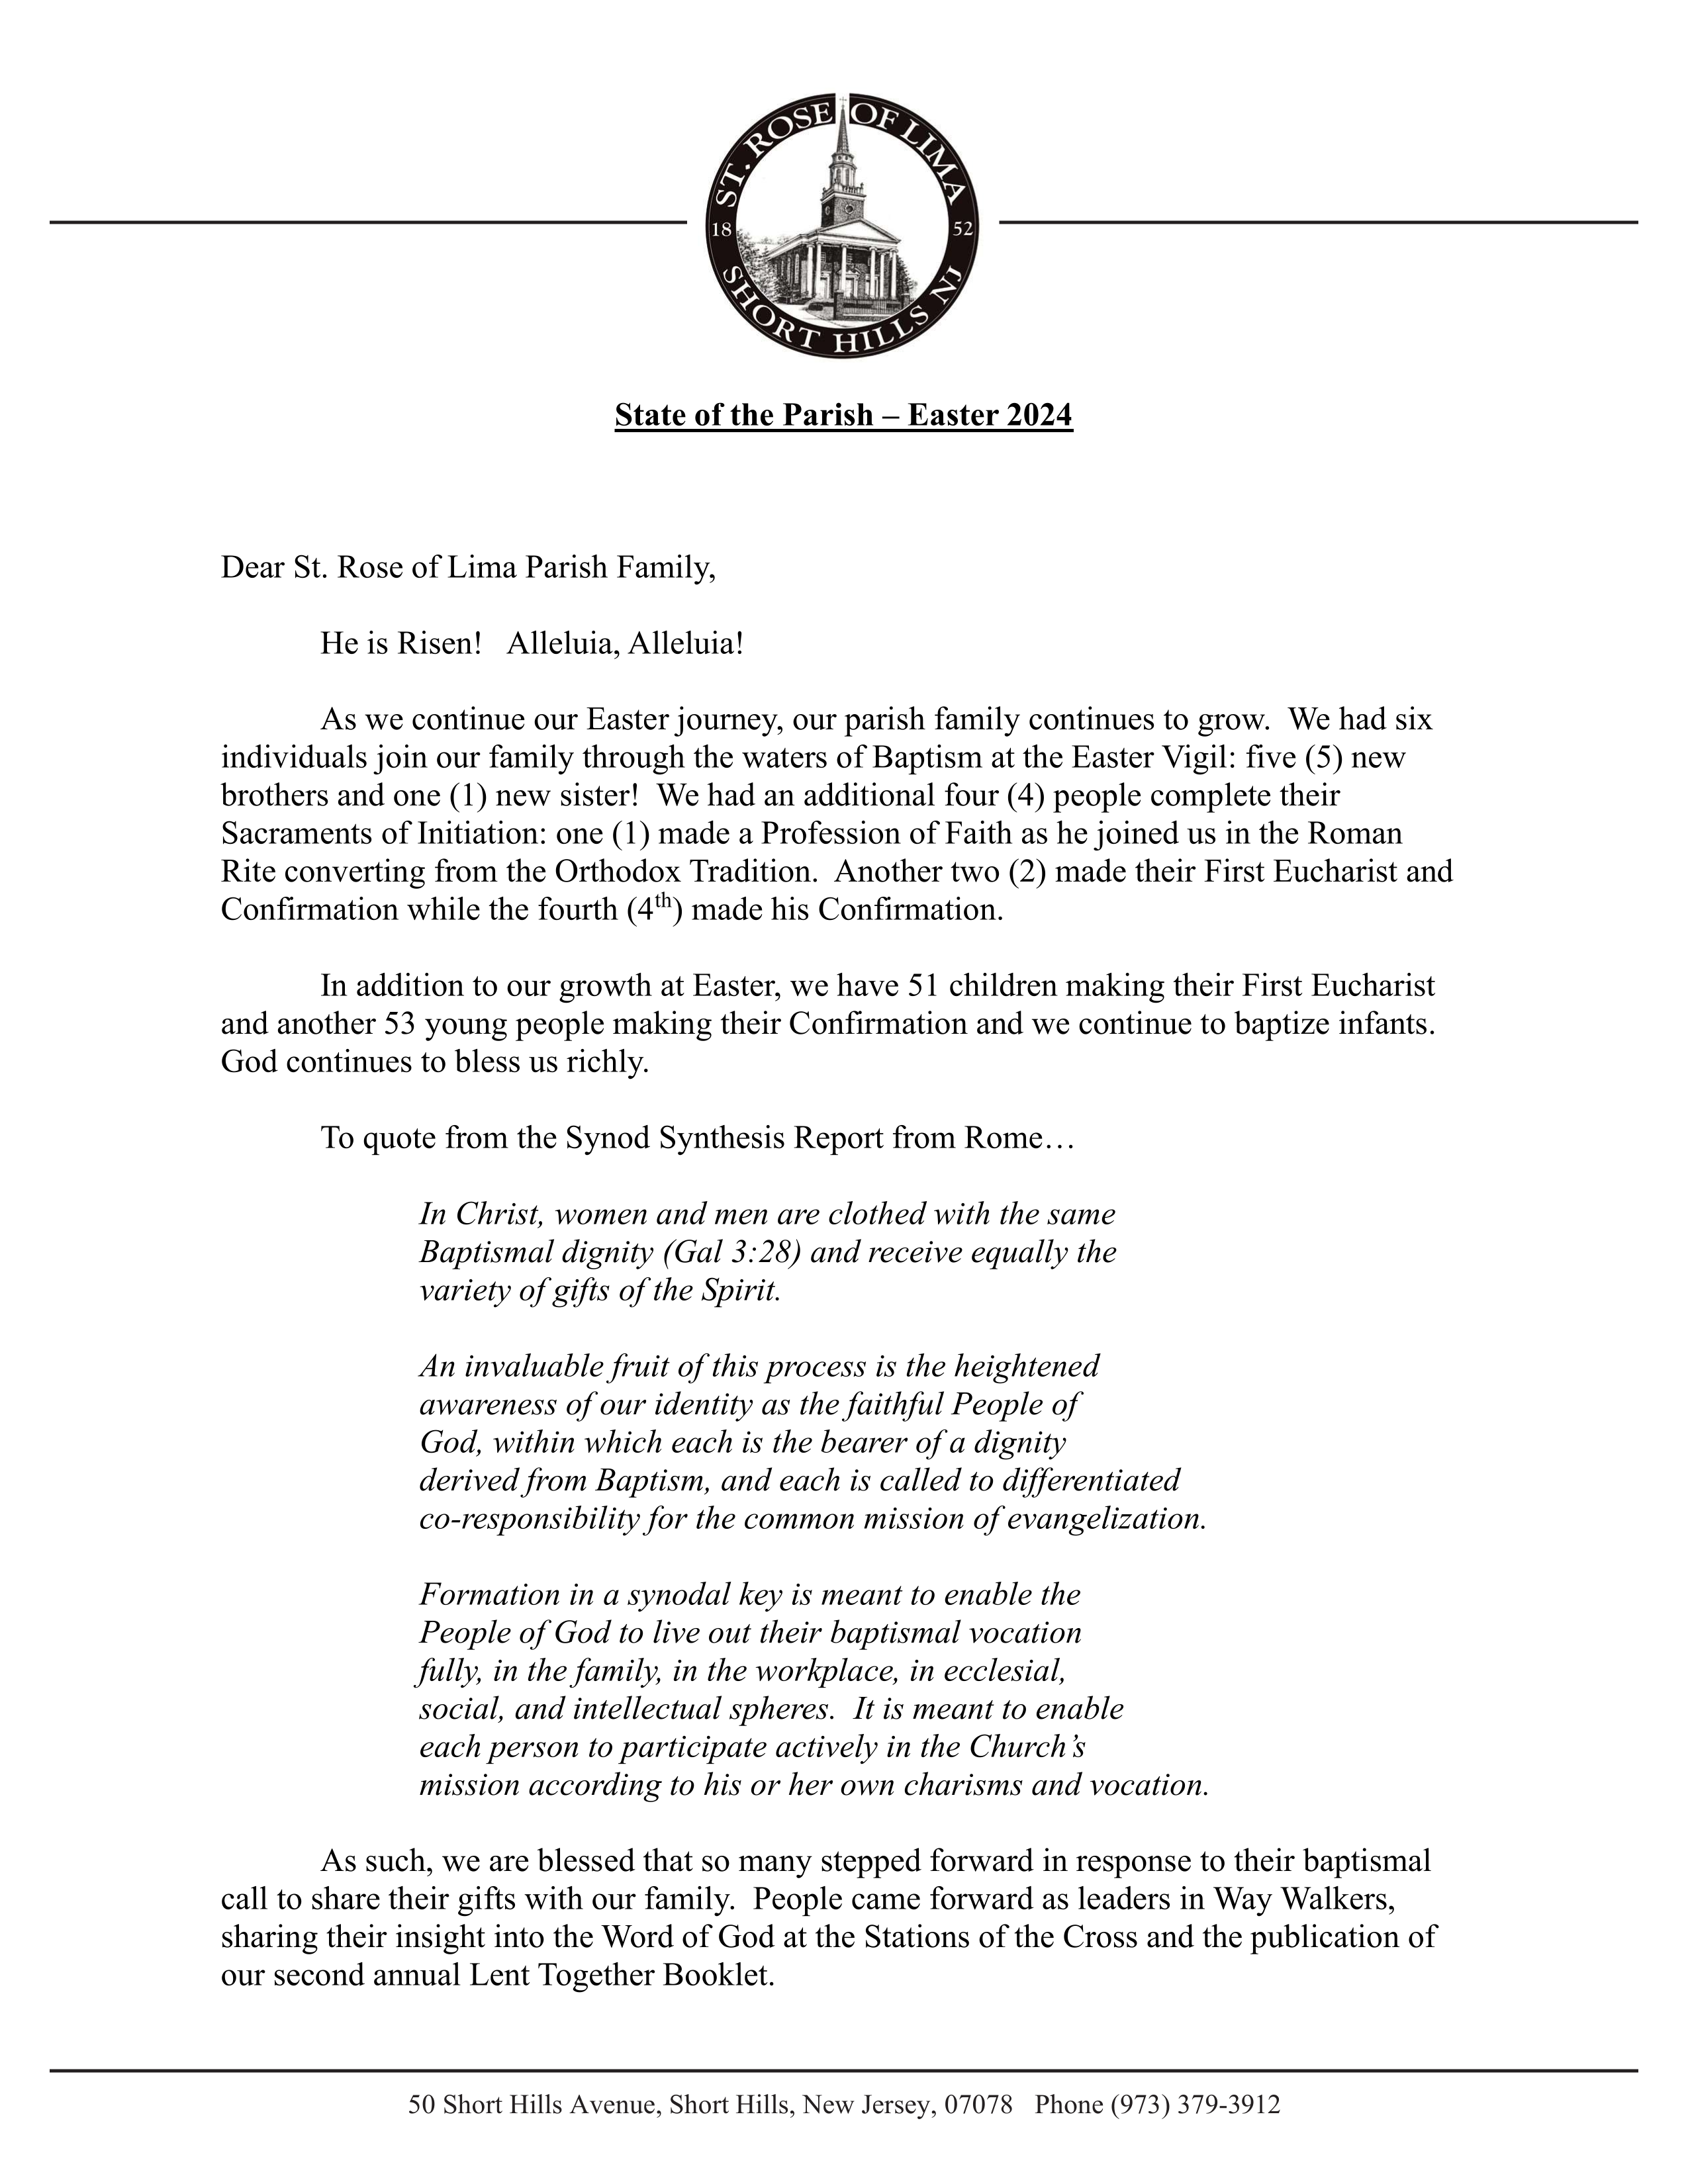 State of the Parish Letter 2024